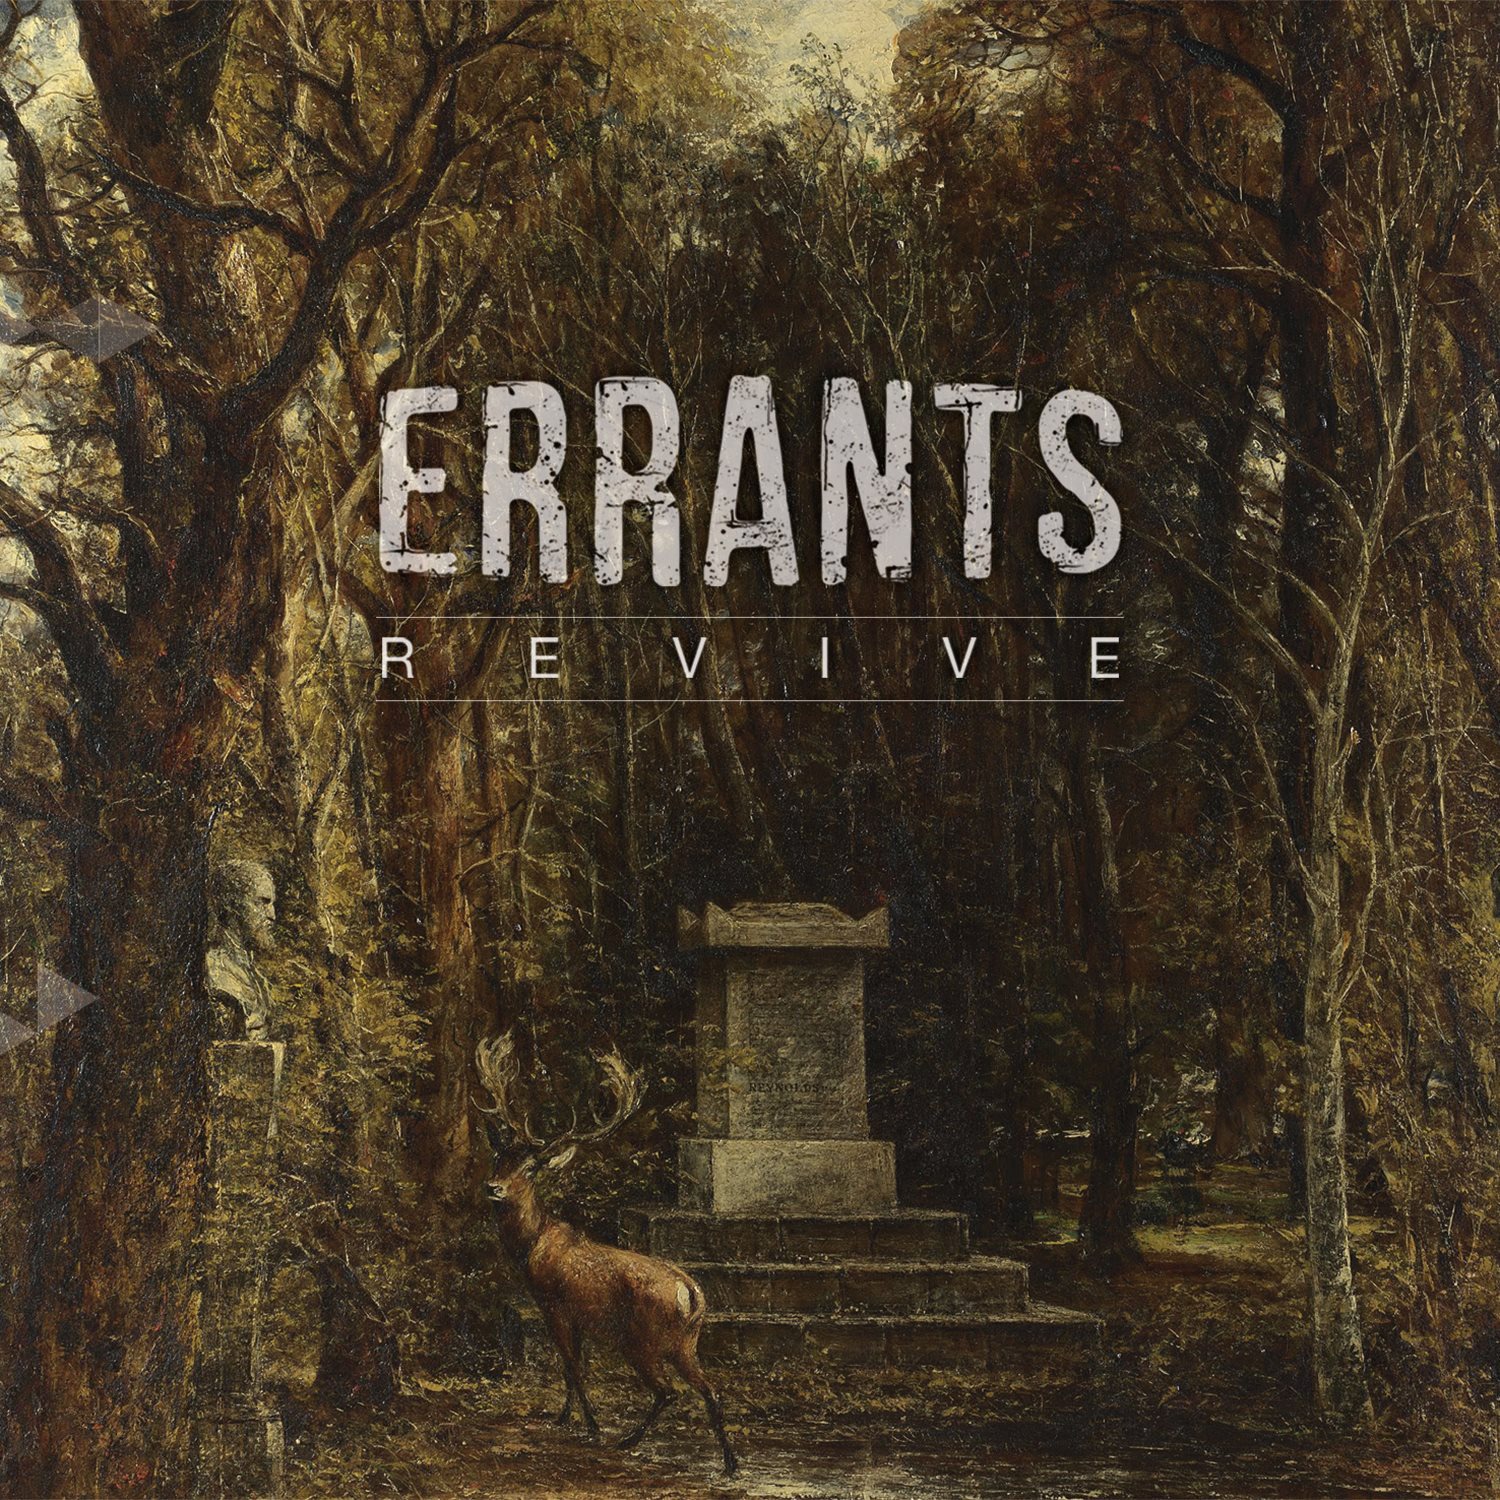 We Are the Errants